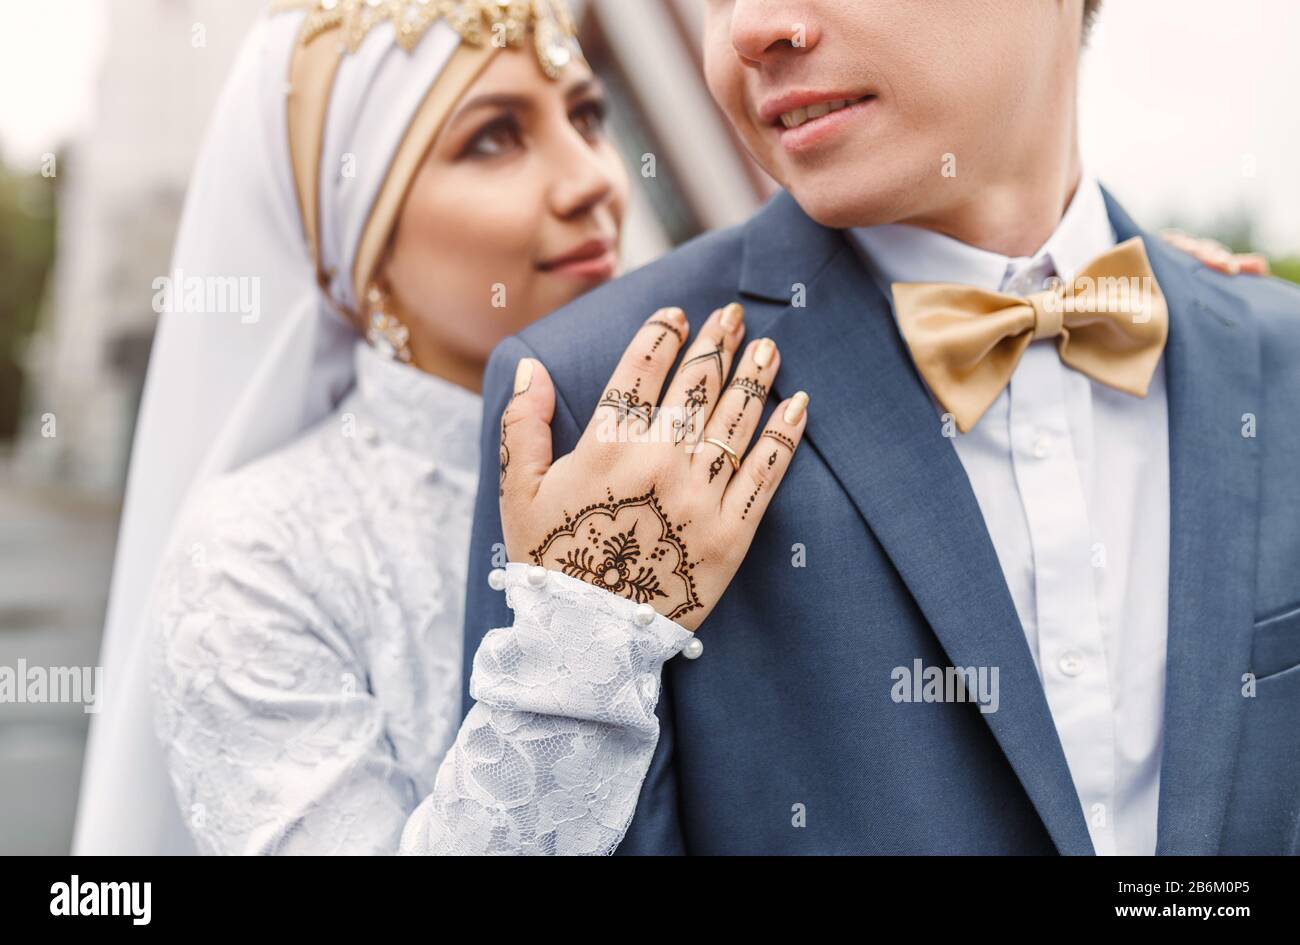 Nikah arabic Wedding Couple during the marriage ceremony Stock Photo